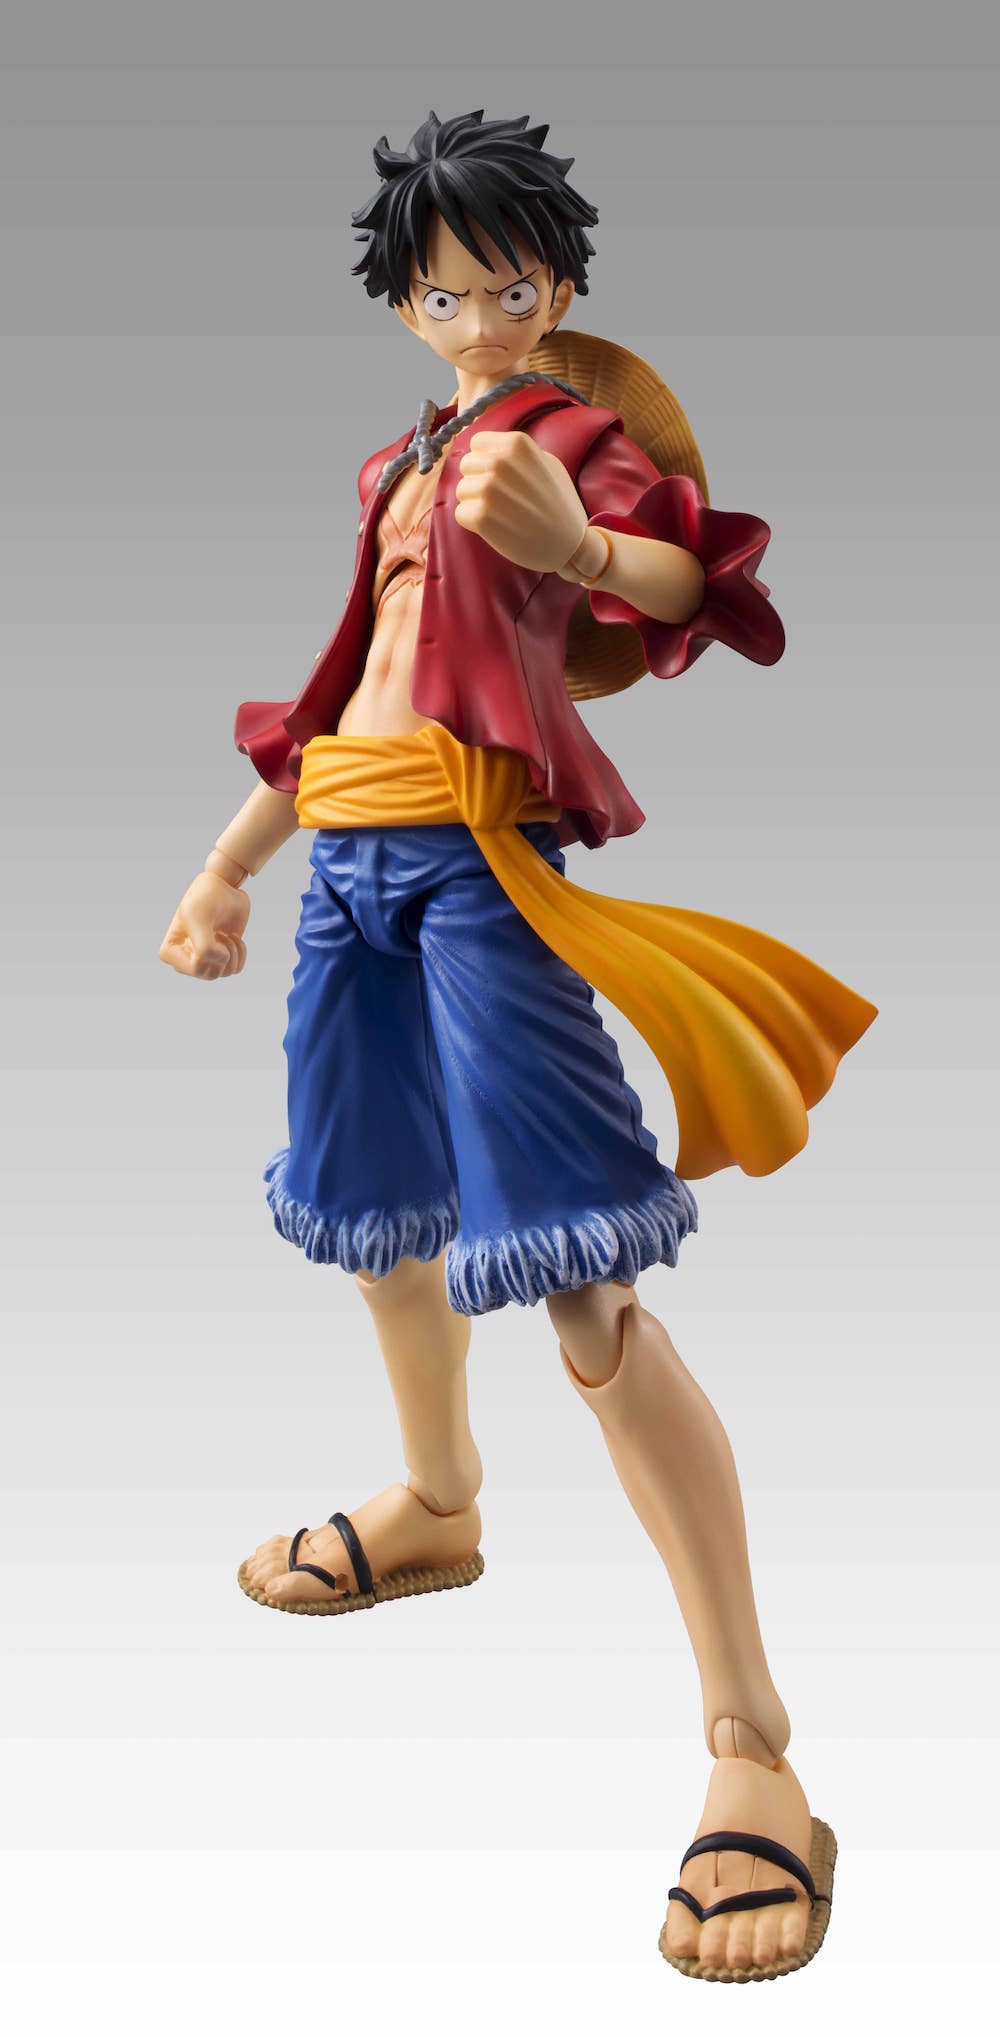 ONE PIECE - Figurine Variable Action Heroes Trafalgar Law Vers2 - 18cm :  : Figurine Megahouse One Piece